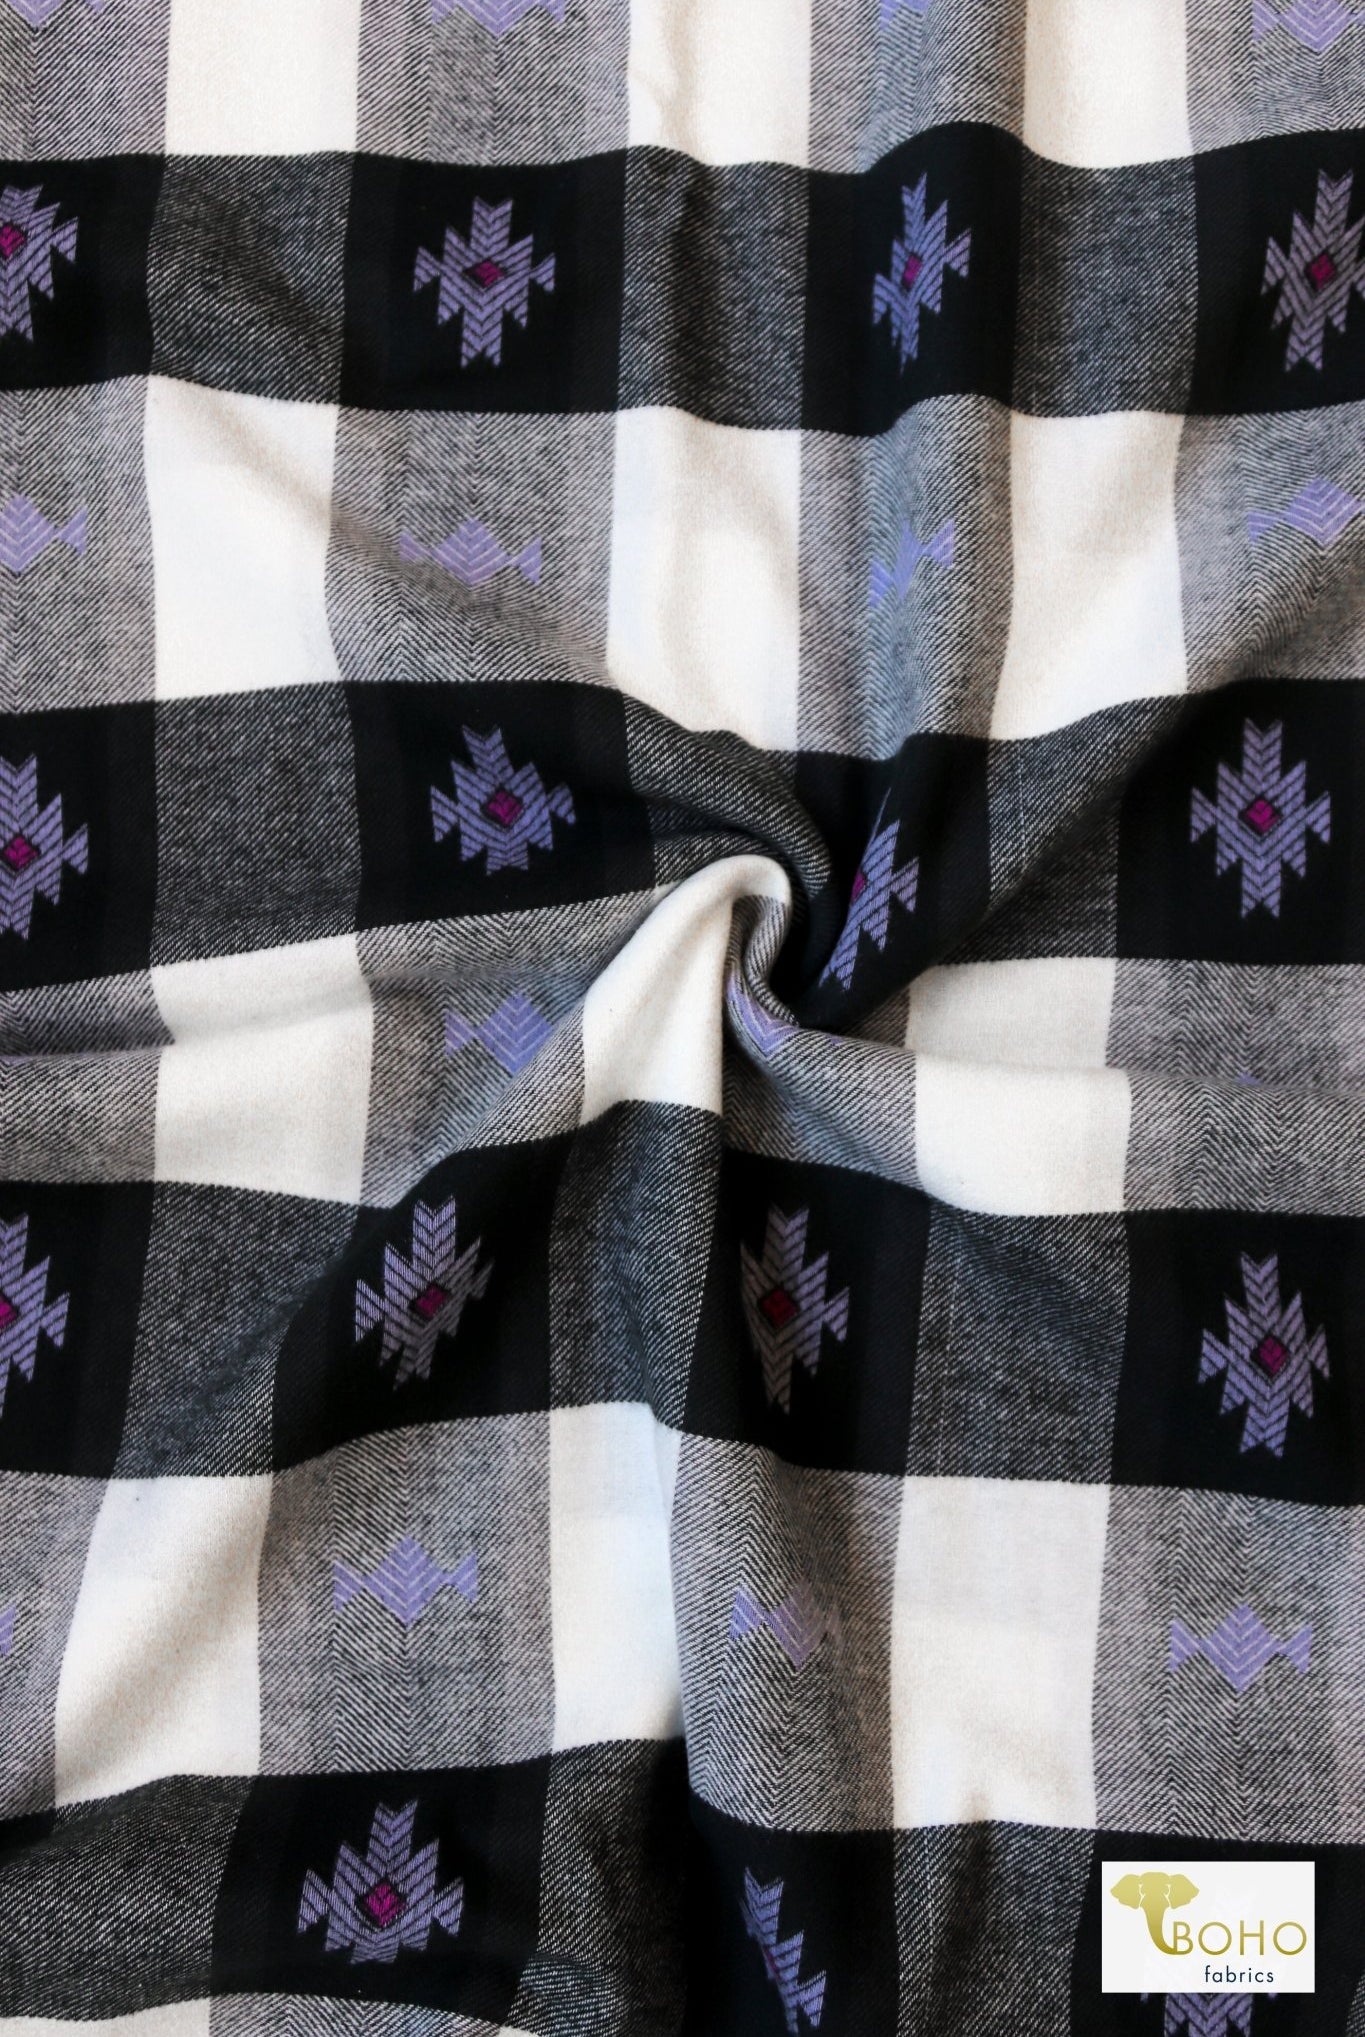 LAST CUTS! Periwinkle Plaid, Embroidered Flannel. Woven Print Fabric - Boho Fabrics